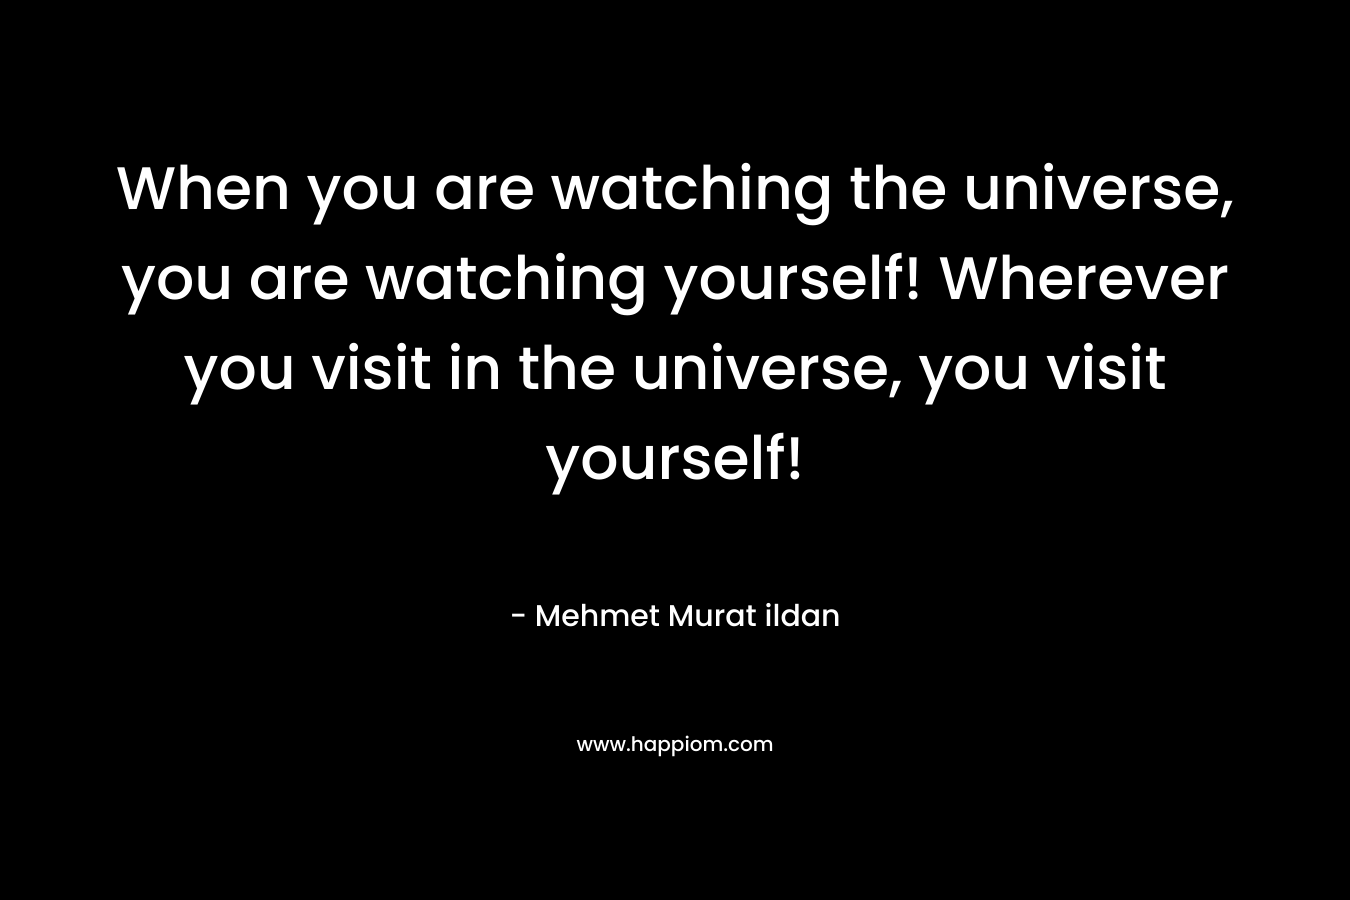 When you are watching the universe, you are watching yourself! Wherever you visit in the universe, you visit yourself!